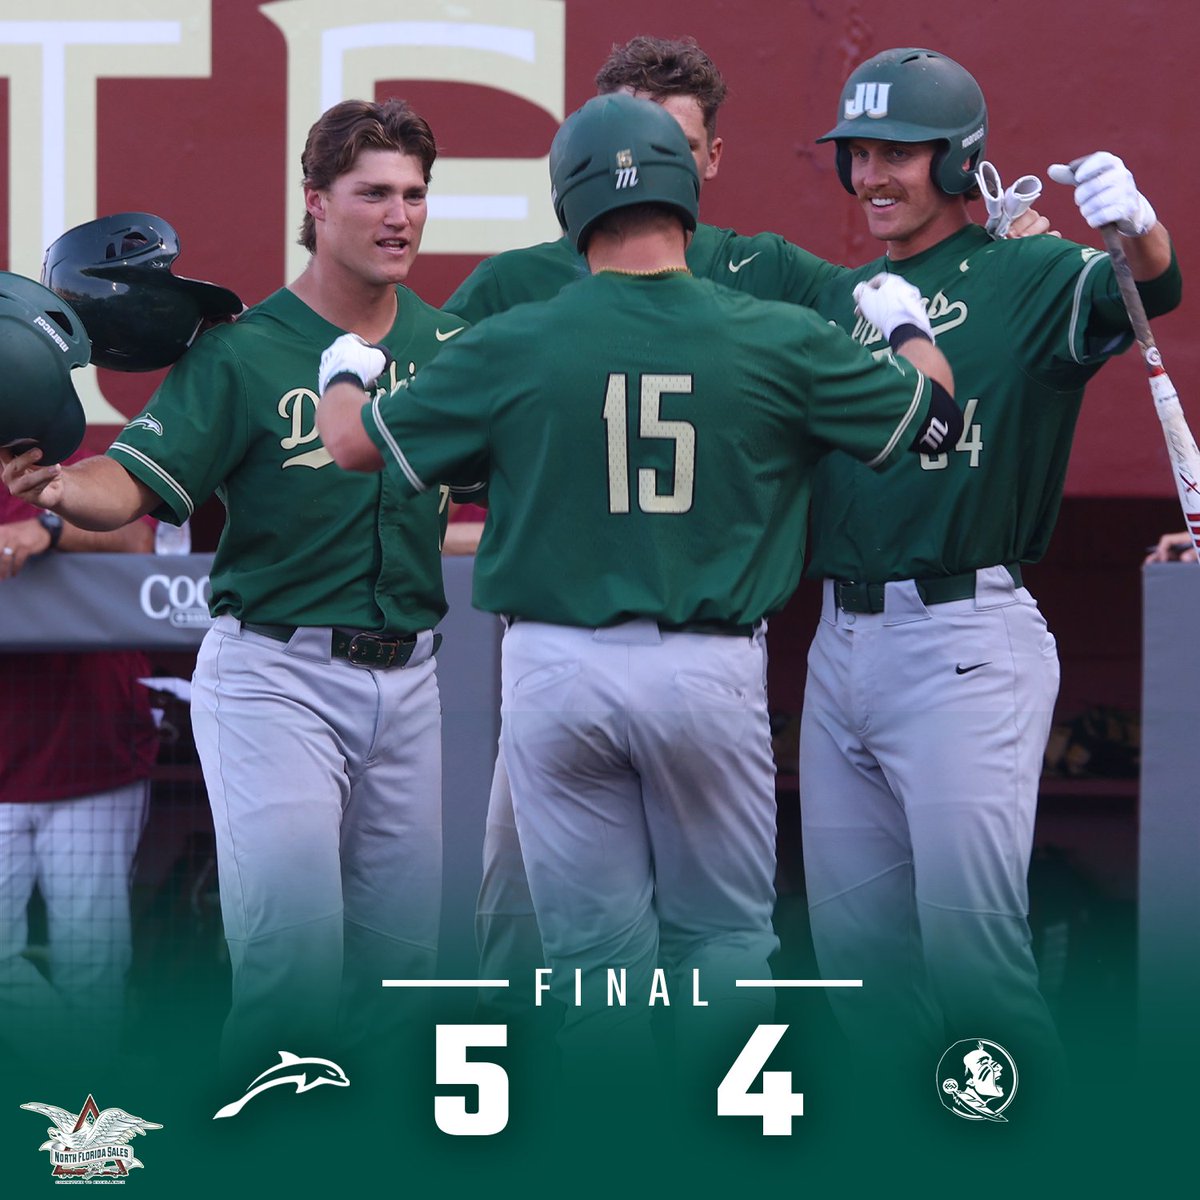 Dolphins hold on to take down the Noles in Tallahassee! For the first time since 2002, JU has defeated Florida, Miami and Florida State all in the same season! Final score pres. by @NorthFLSales  #JUPhinsUp